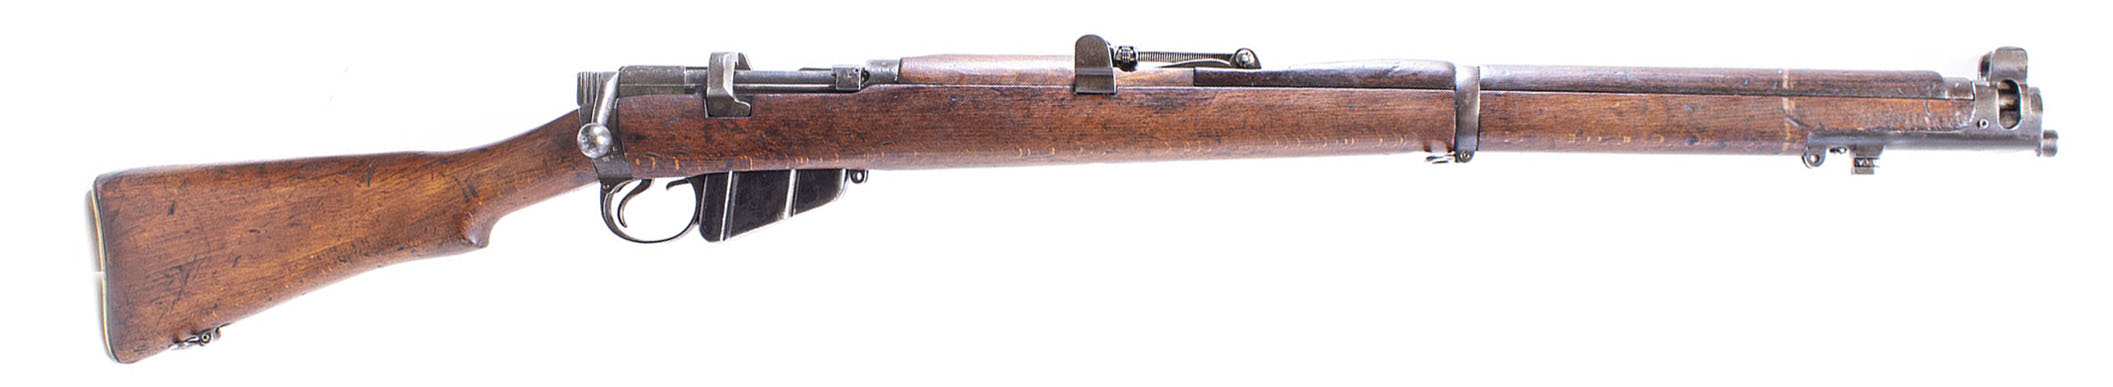 Lee Enfield SMLE No.1 MKIII